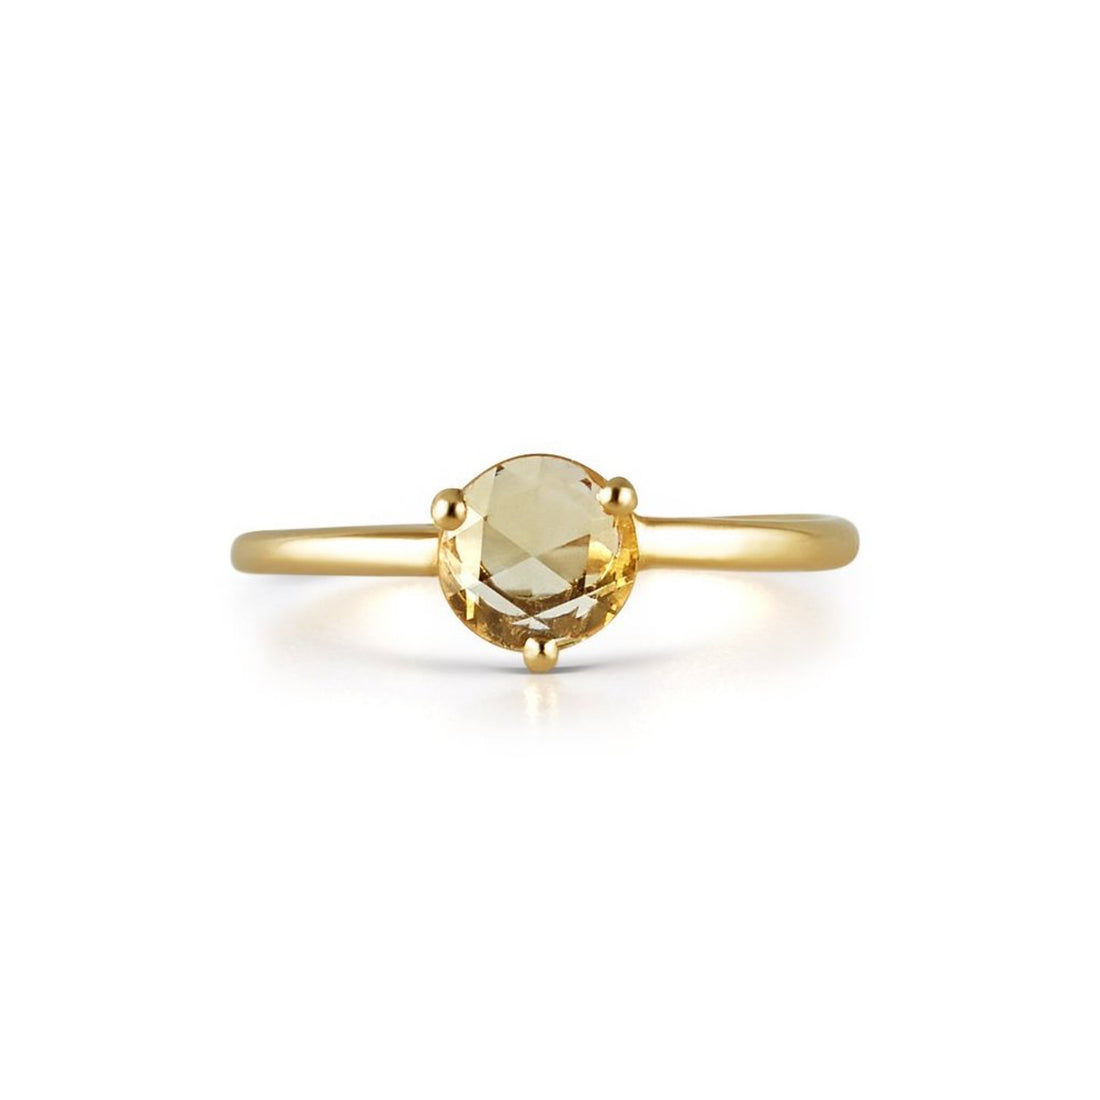  Rose Cut Yellow Diamond Ring by Michelle Oh | The Cut London